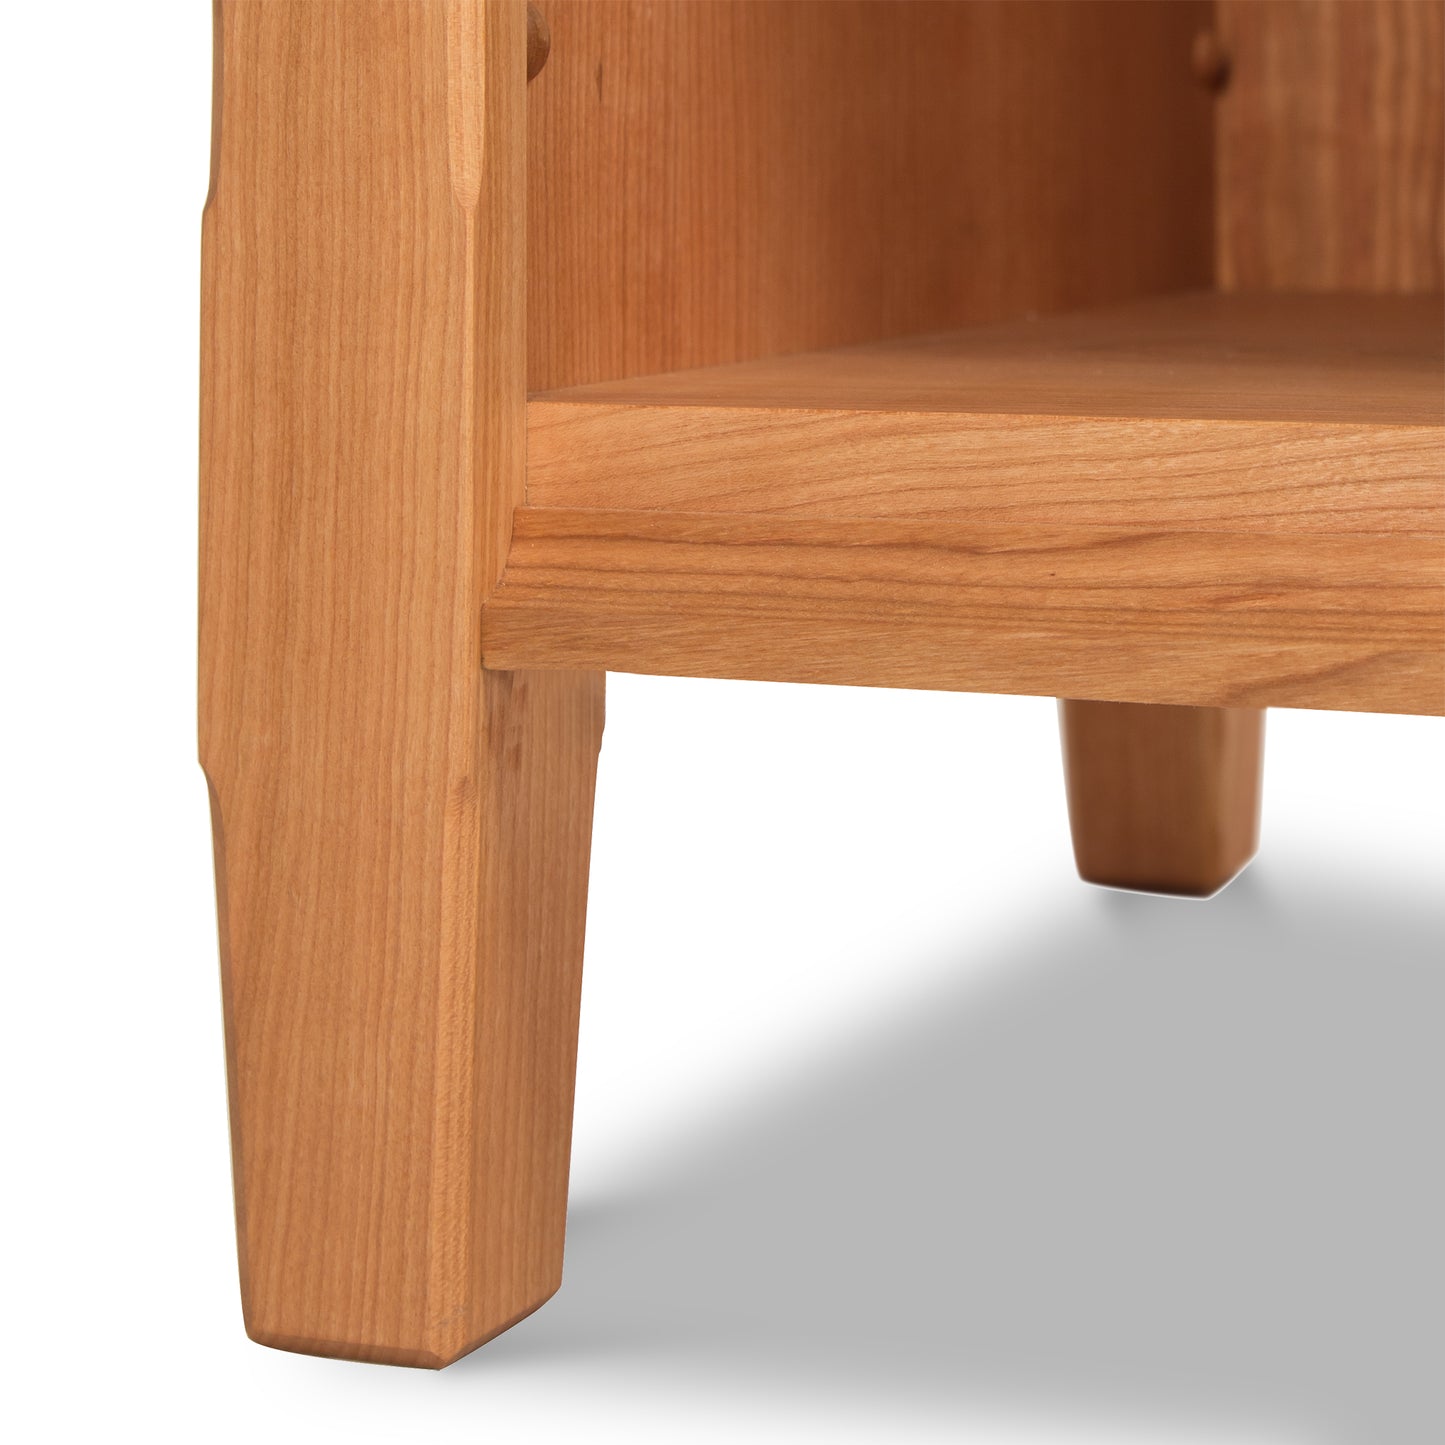 Close-up of a Vermont Shaker 1-Drawer Enclosed Shelf Nightstand by Maple Corner Woodworks, focusing on the detail of the seat and leg junction, with a smooth finish and visible wood grain.